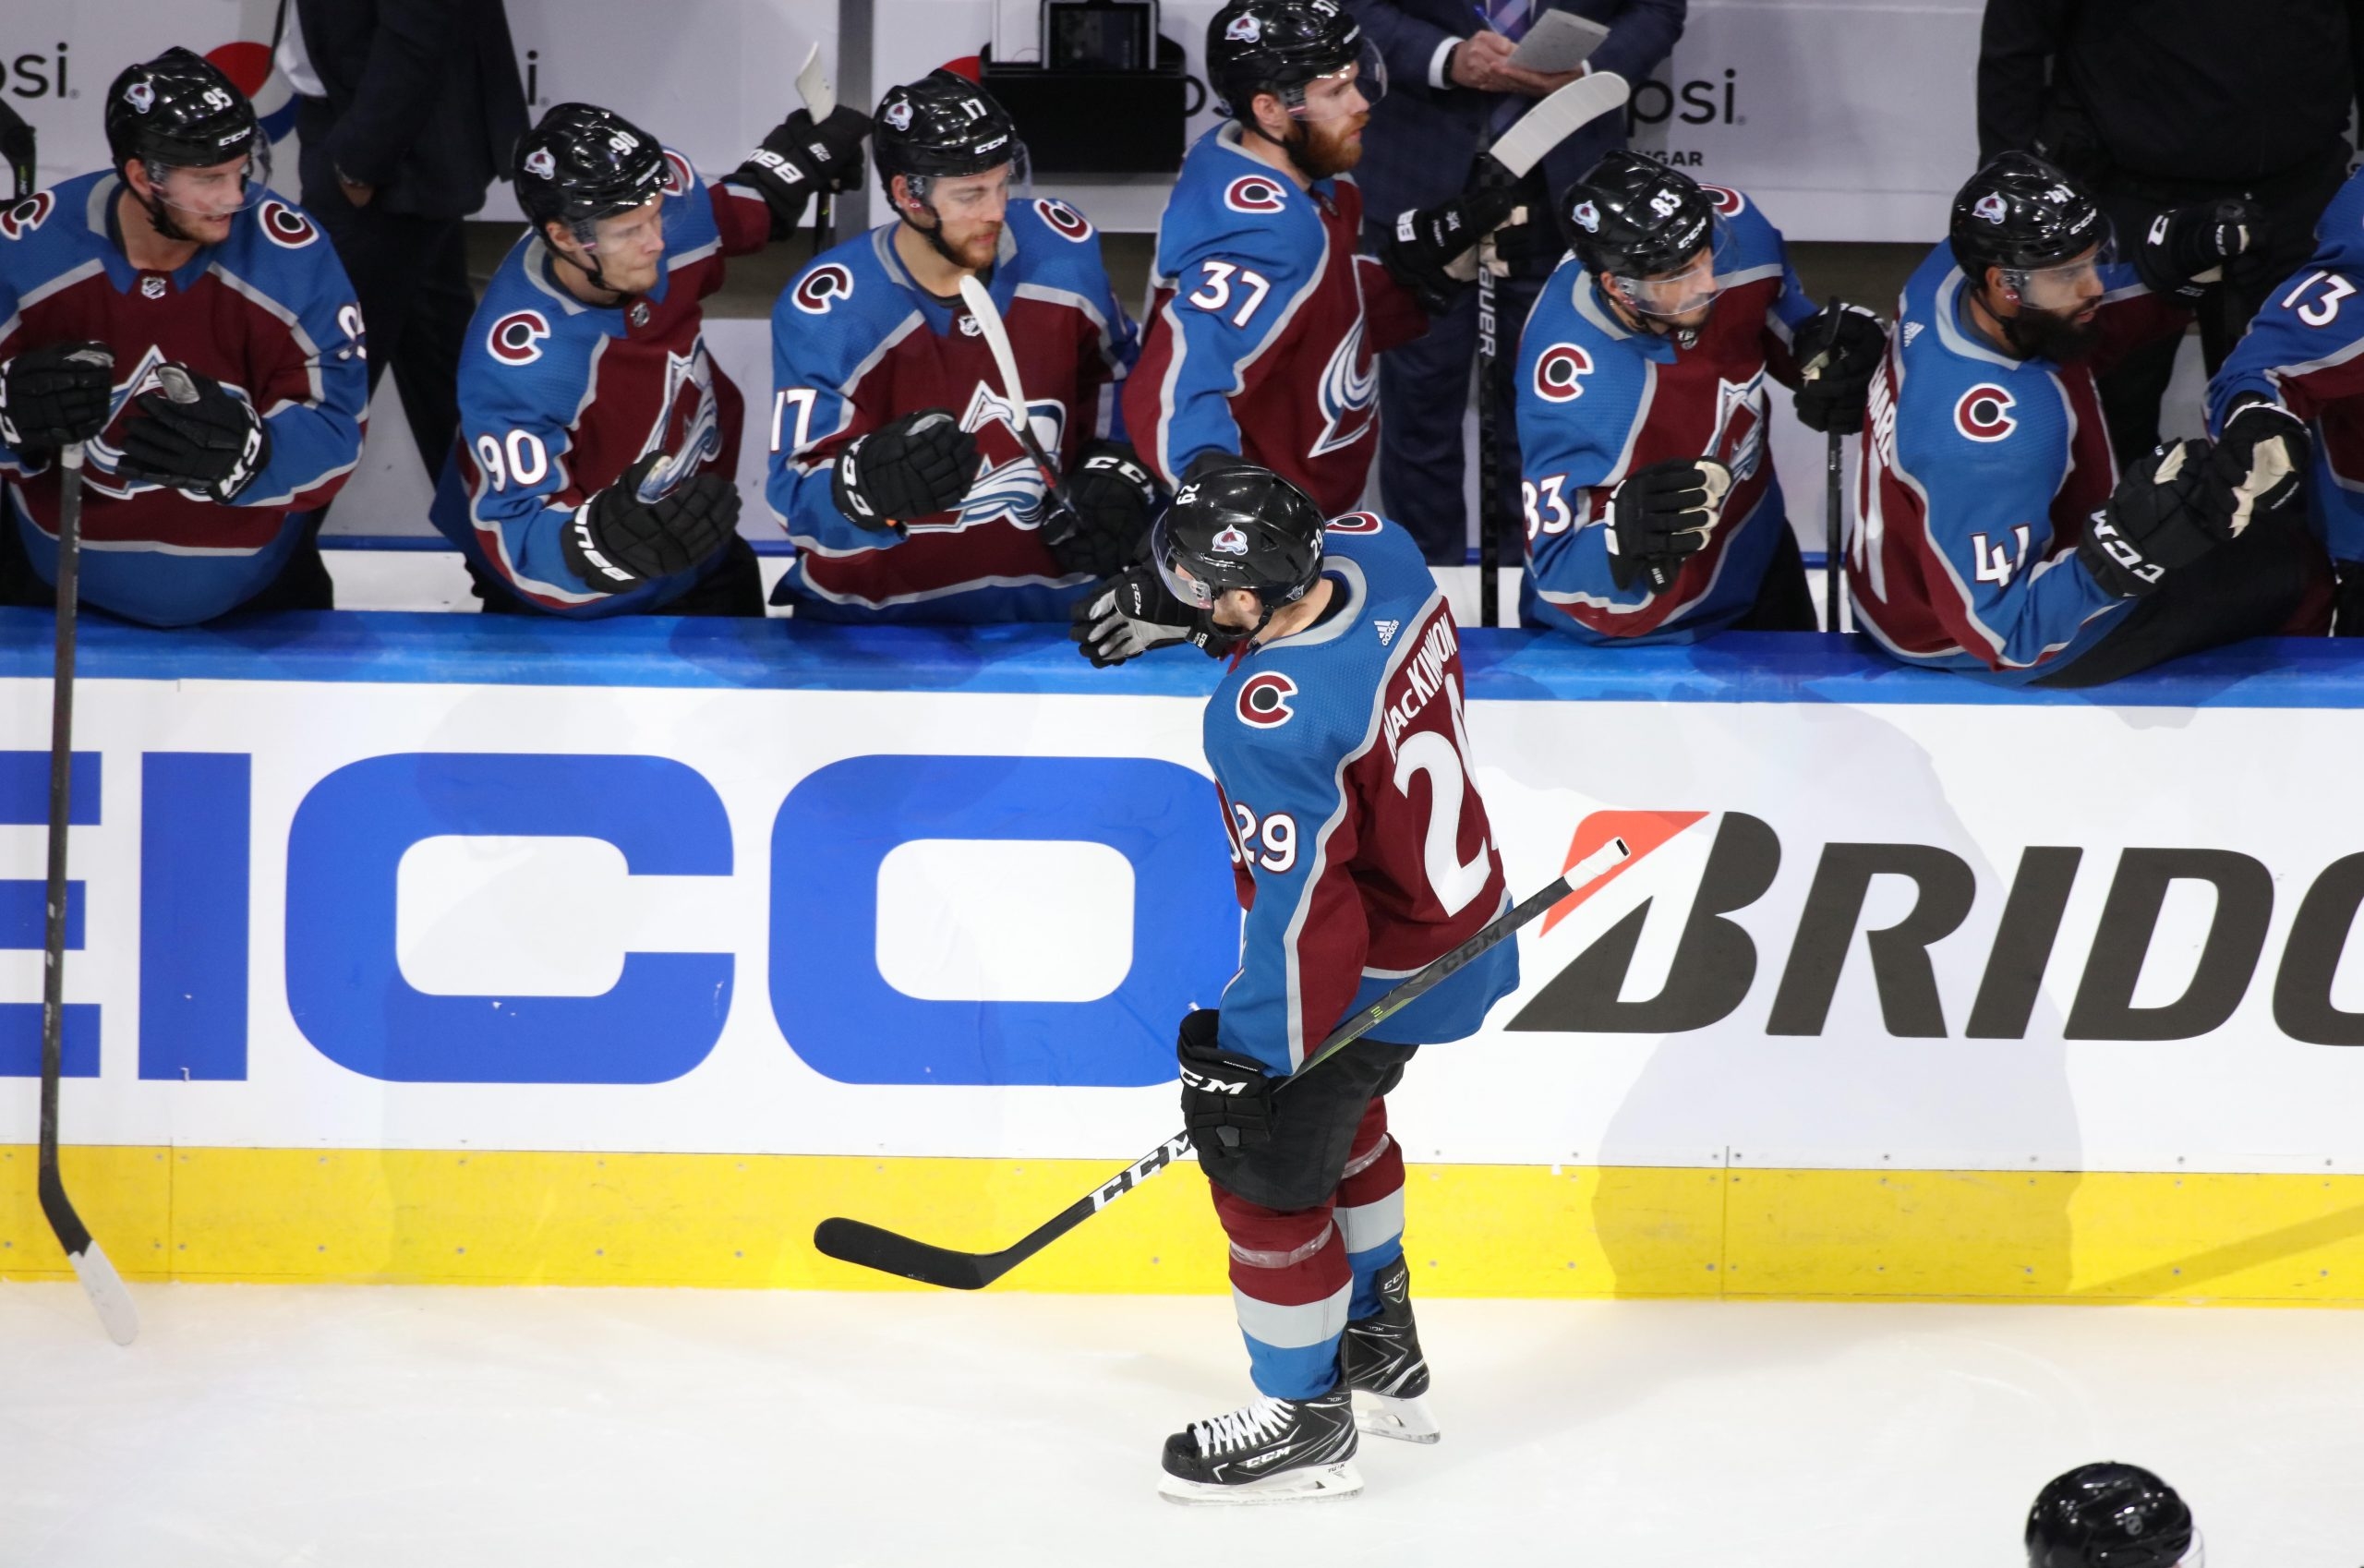 Avalanche's Nathan MacKinnon out vs. Red Wings with lower-body injury